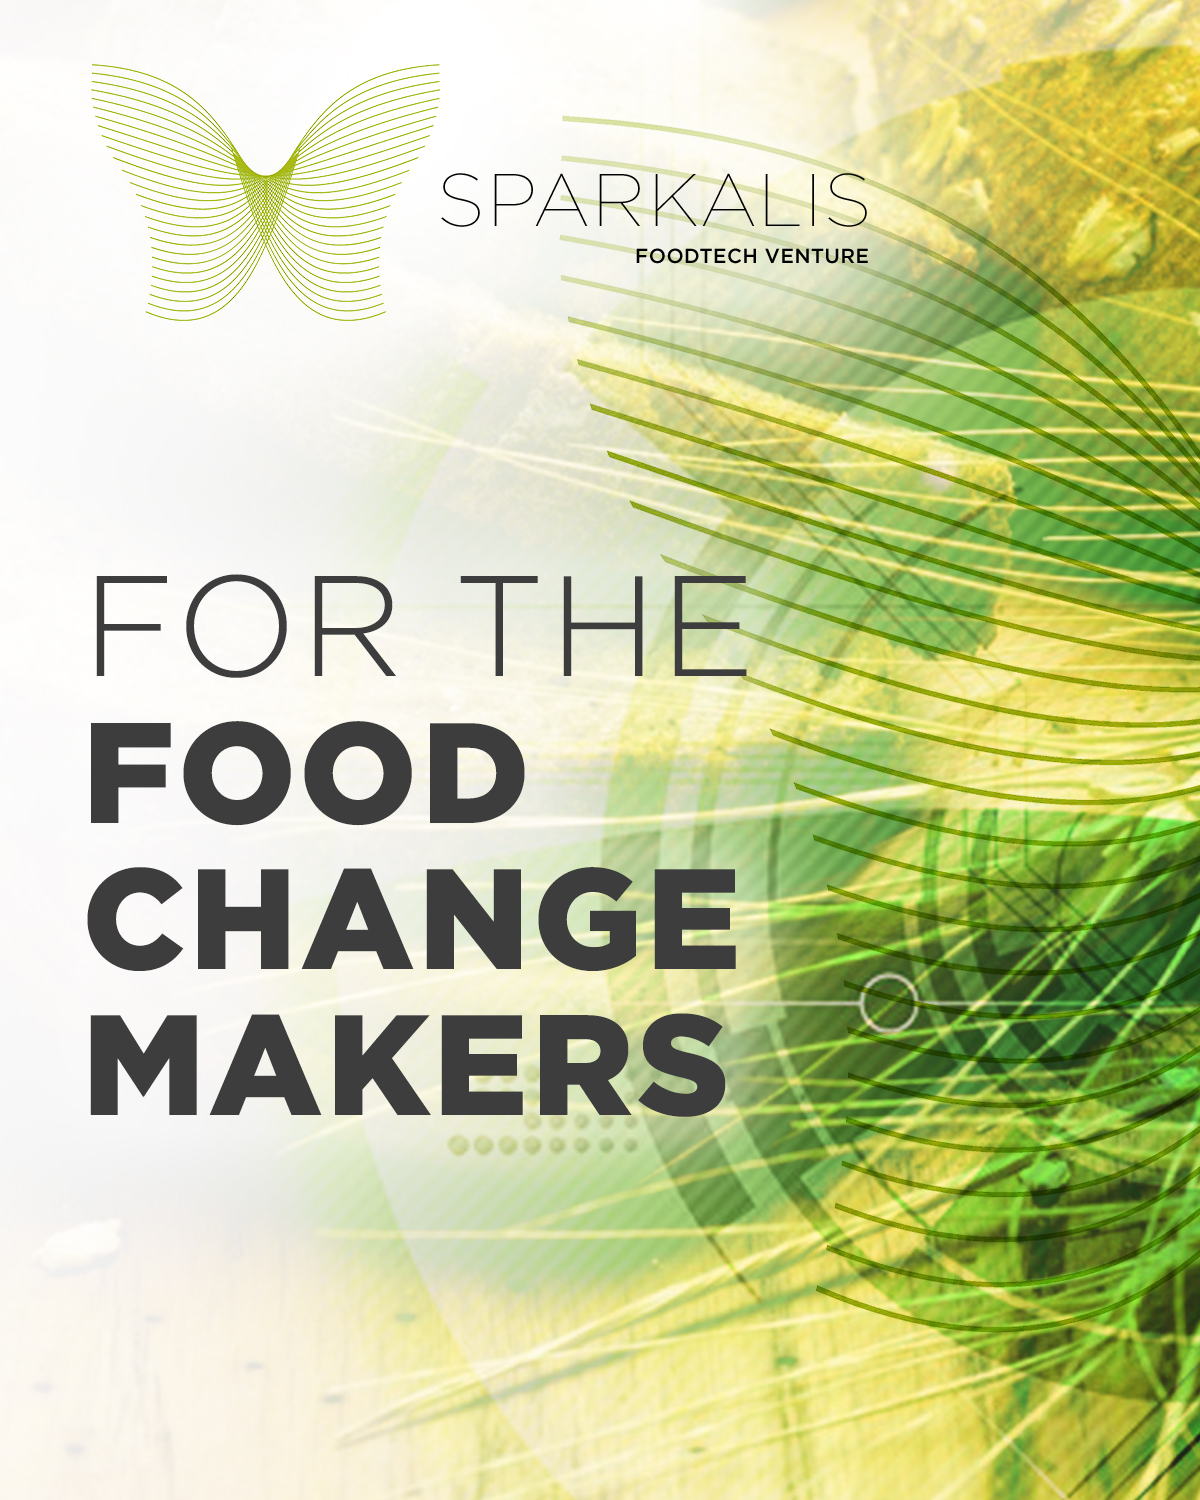 Puratos launches start-up investment fund for food tech changemakers